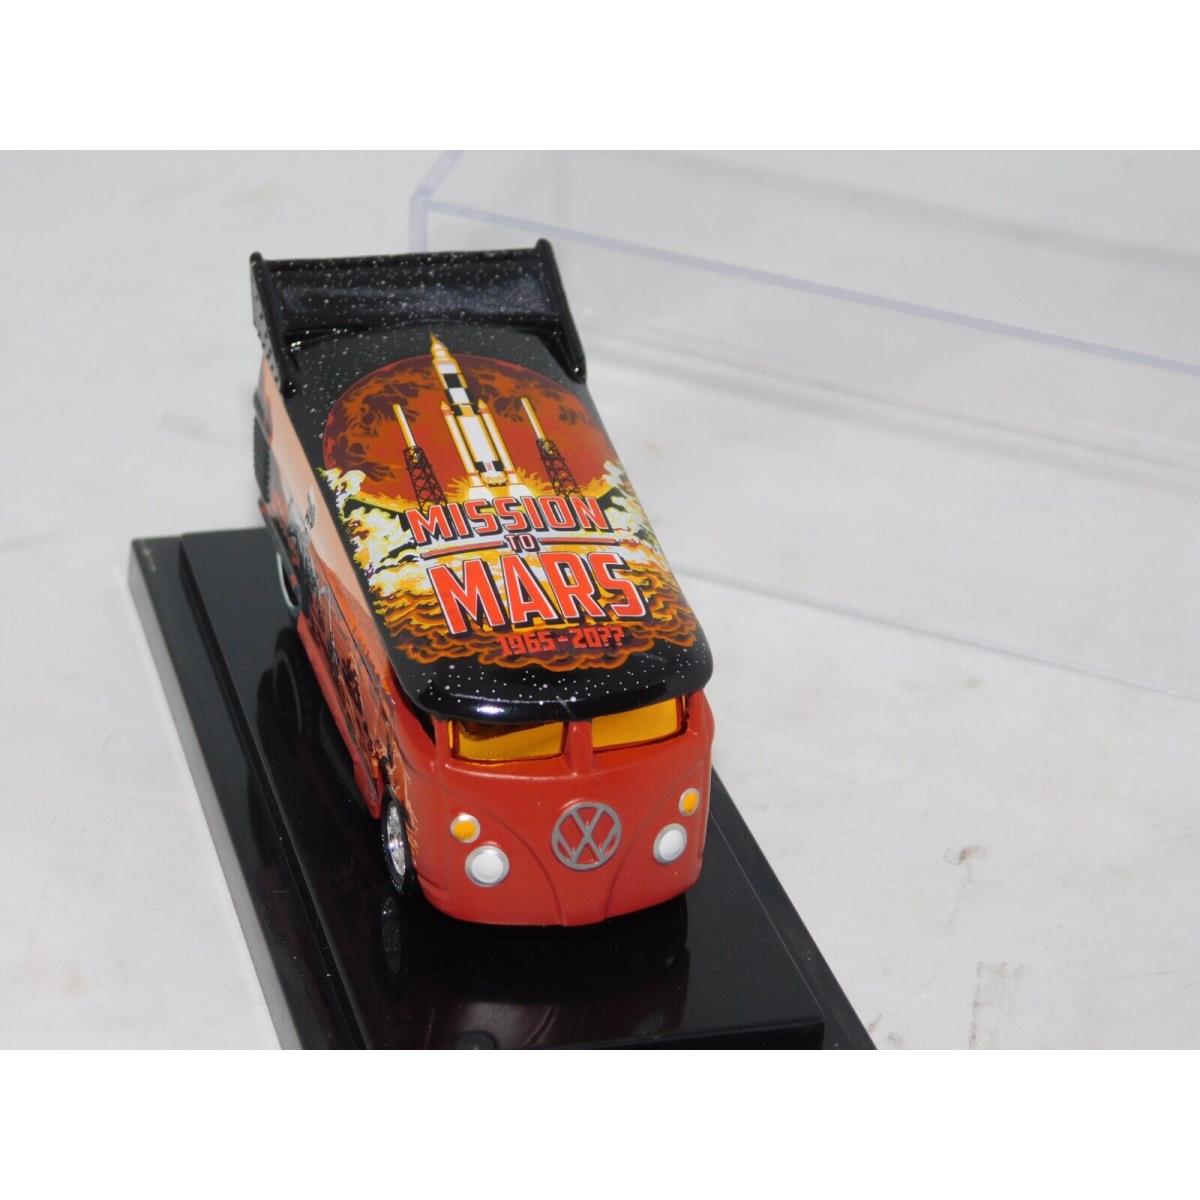 Liberty Promotions VW Drag Bus Space Exploration Series Mission to Mars 400/1000